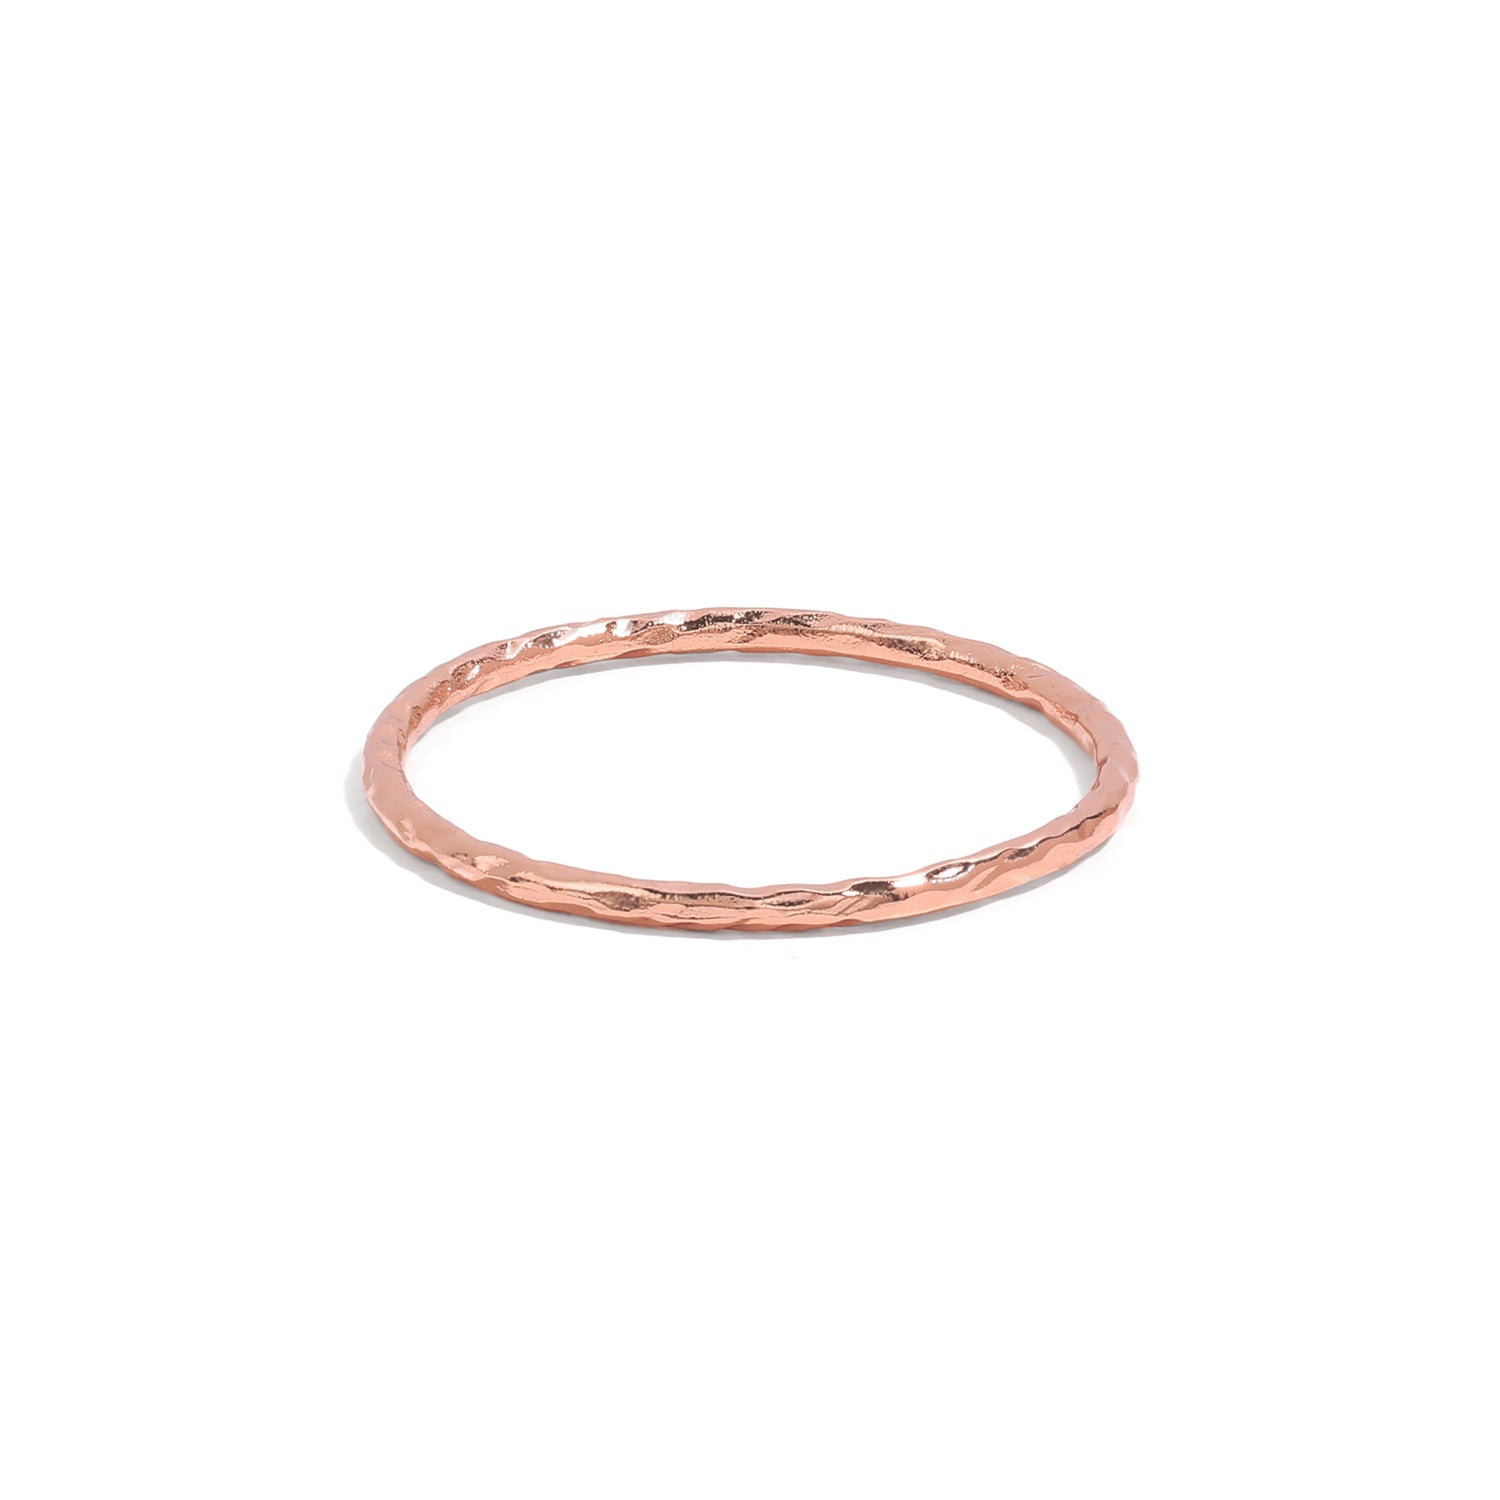 Minimalist and classy ring in vermeil rose gold